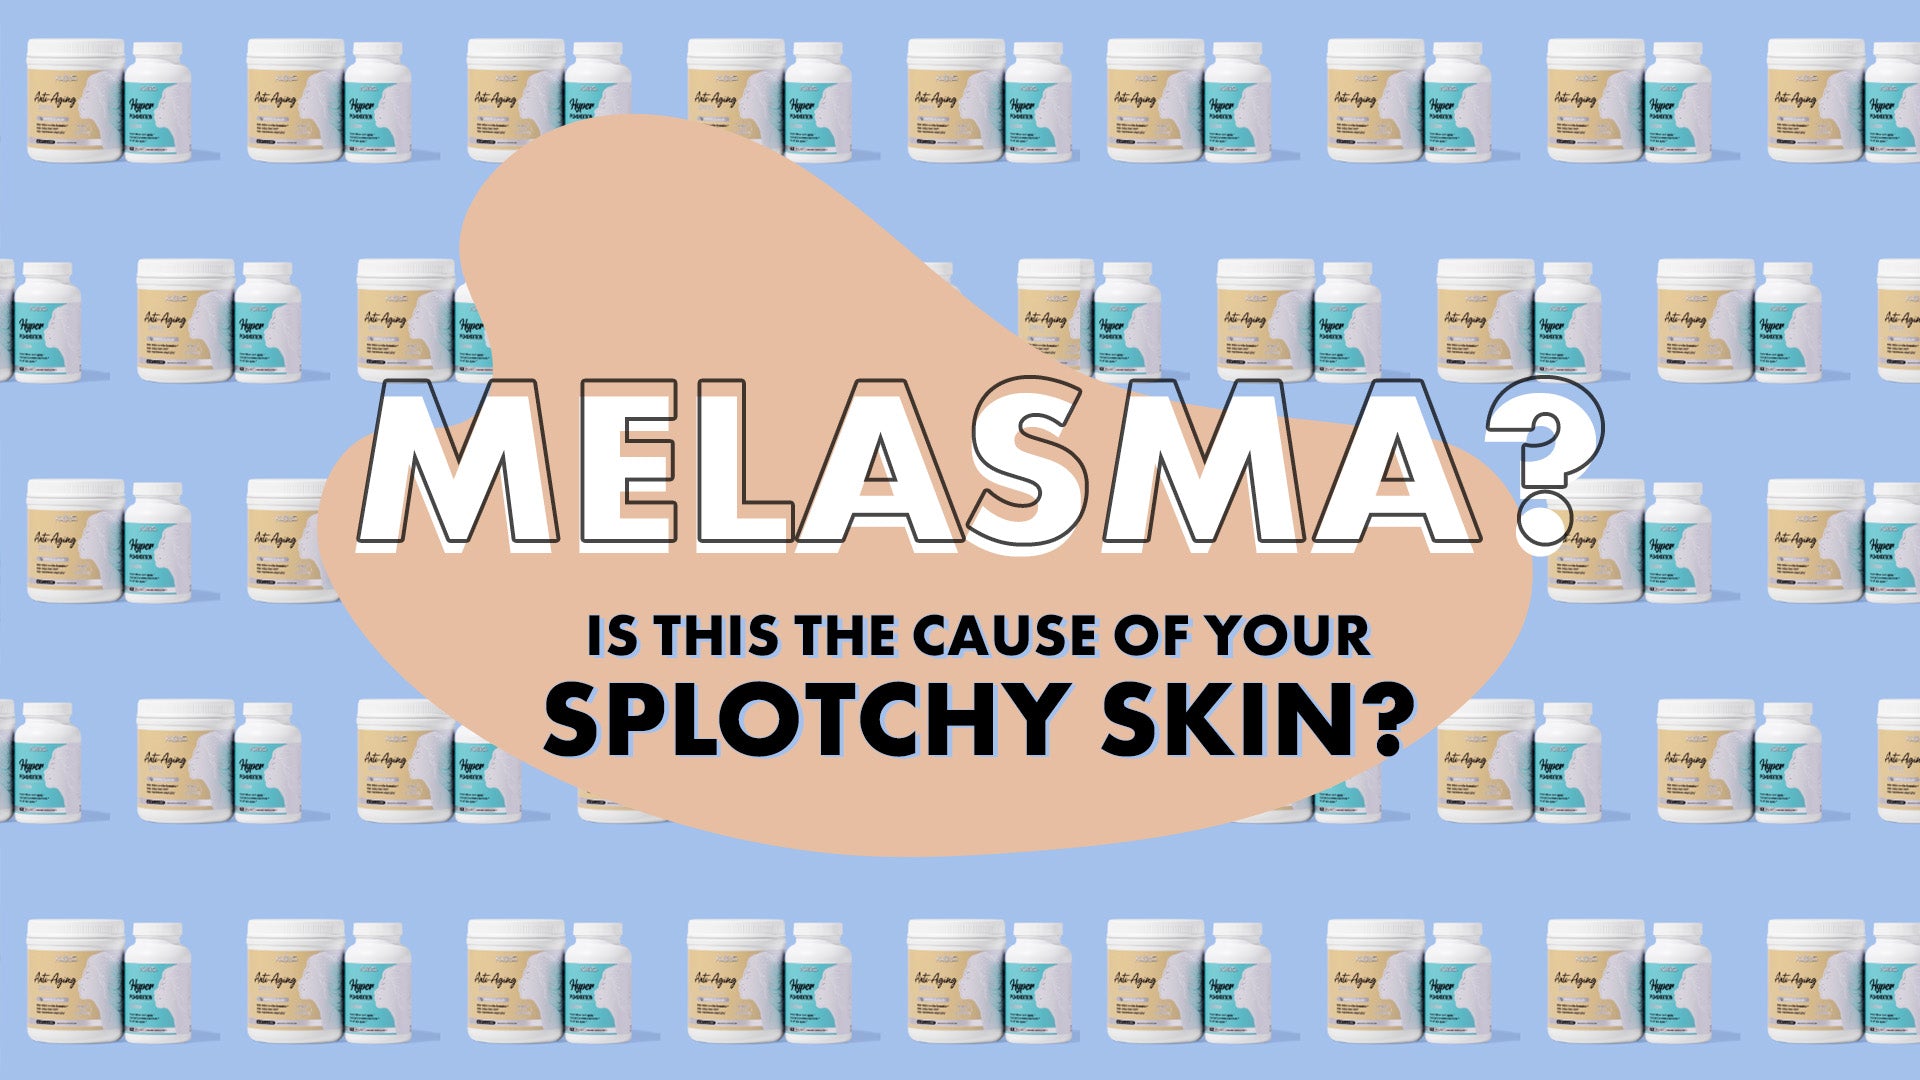 Is melasma the cause of your splotchy skin?